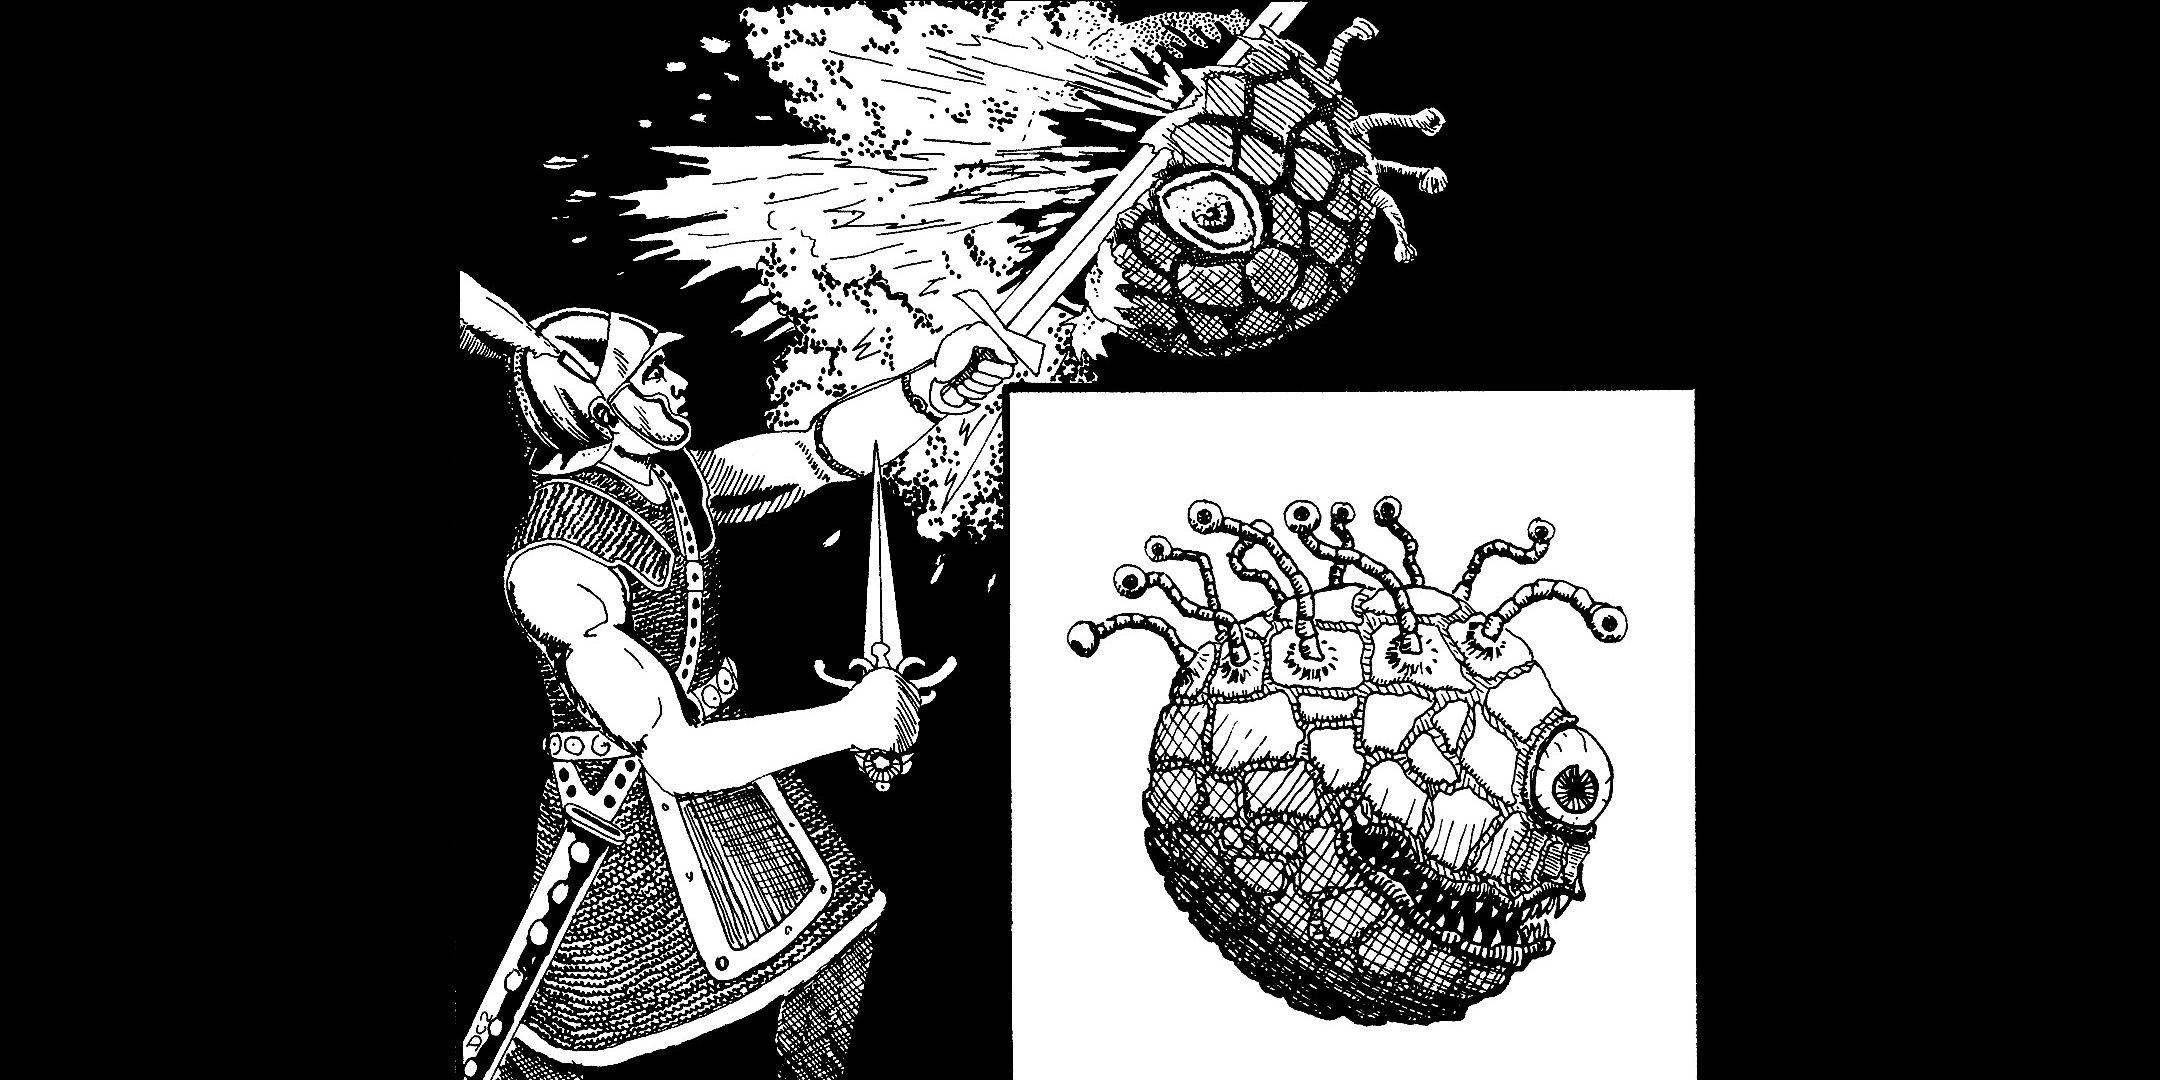 A gas spore spore being struck and a looming beholder for contrast from the 1st edition D&D monster manual